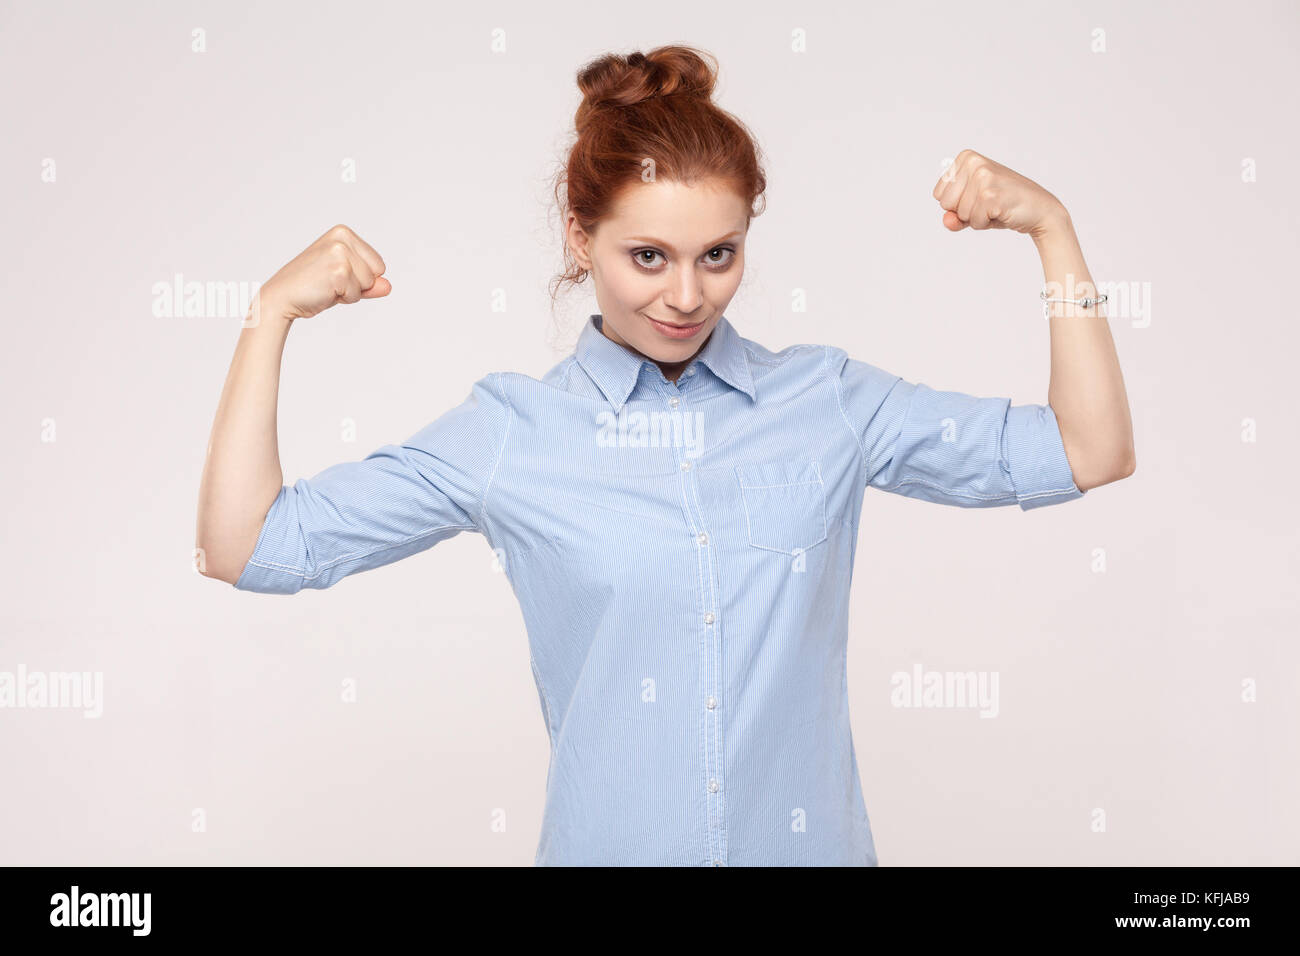 Beautifulwoman posin looks like bodybuilder, showing biceps, looking at camera and smiling. Indoor. Gray background Stock Photo